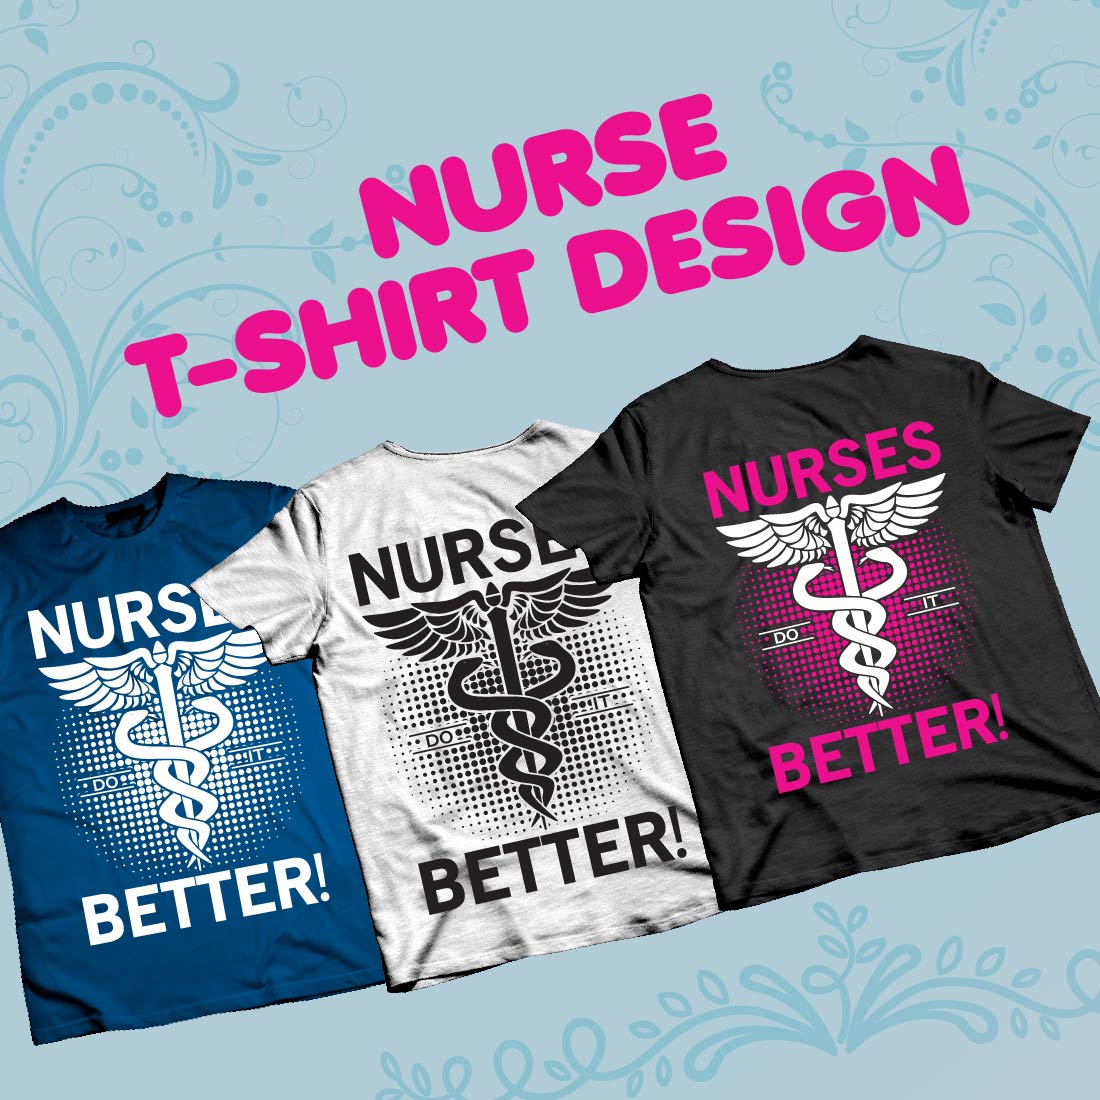 A pack of images of t-shirts with an adorable print about nurses.